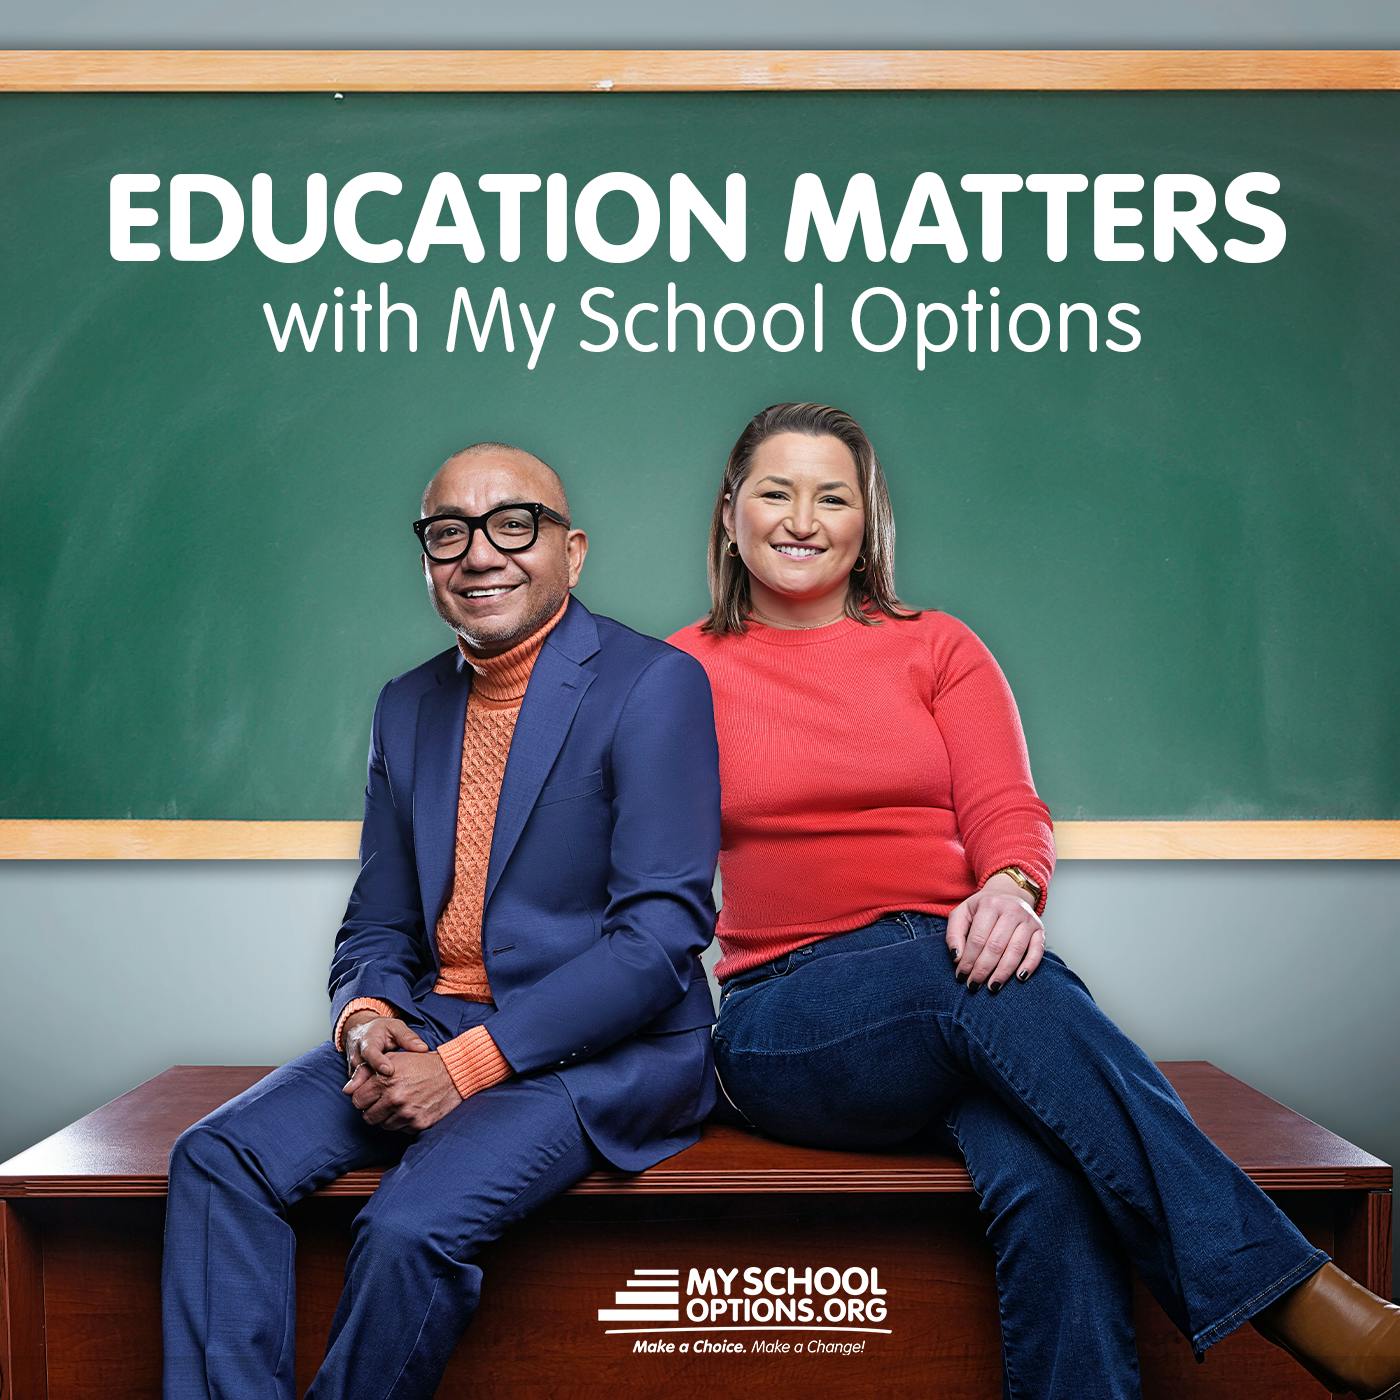 Episode 8 -  Education Matters News Roundup: Microschools, School Choice Expansions, And More